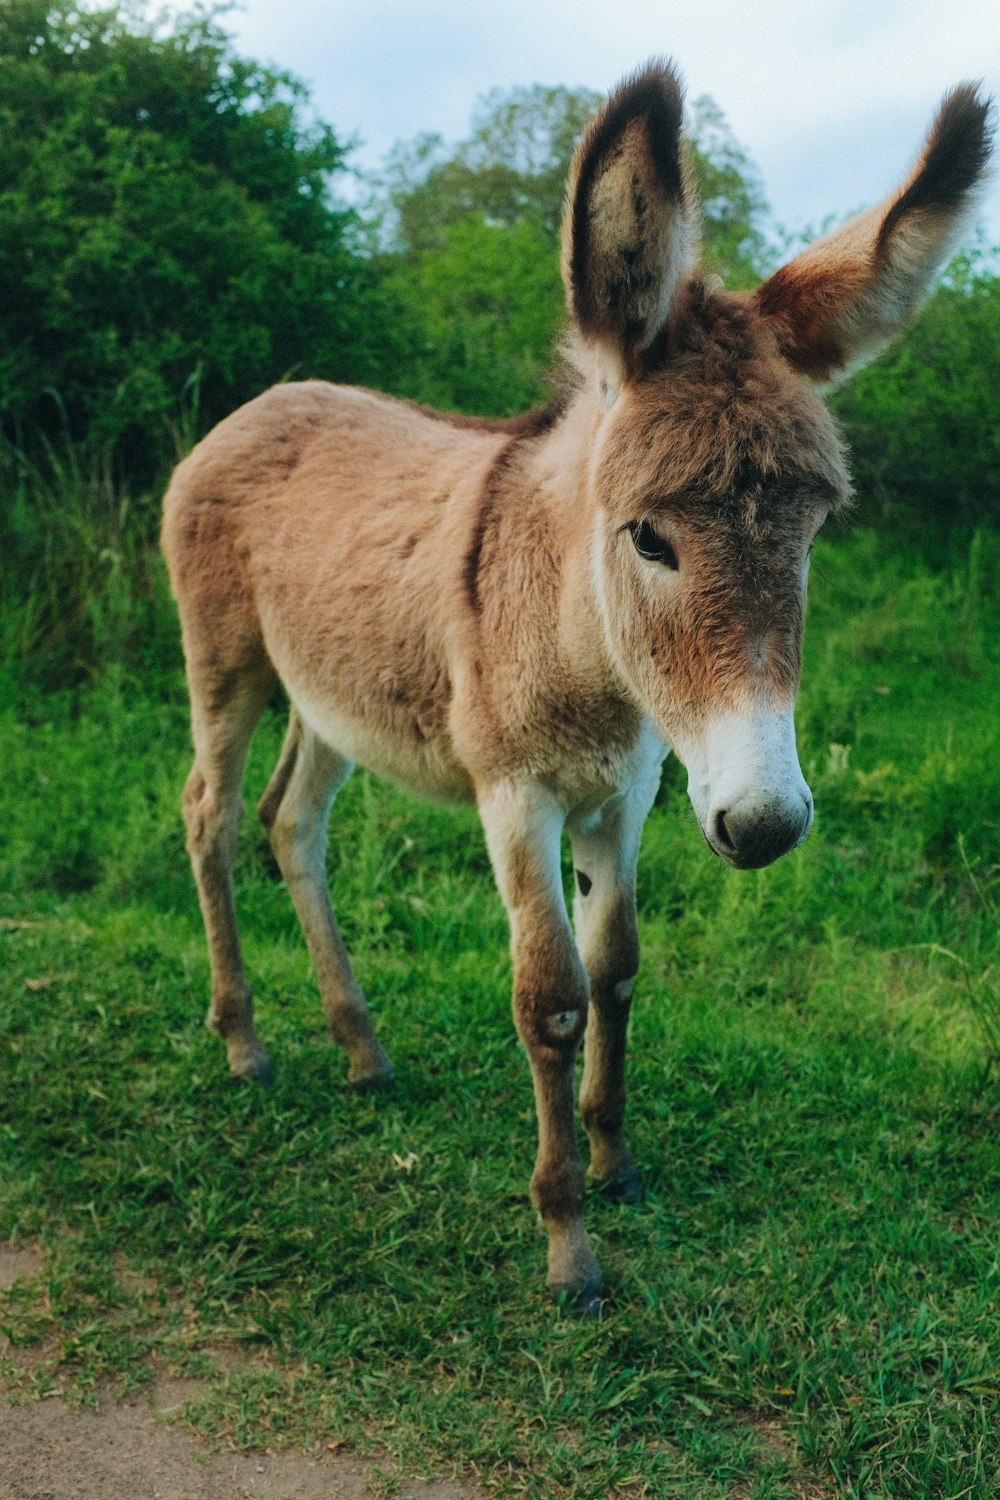 a donkey standing in a grassy area